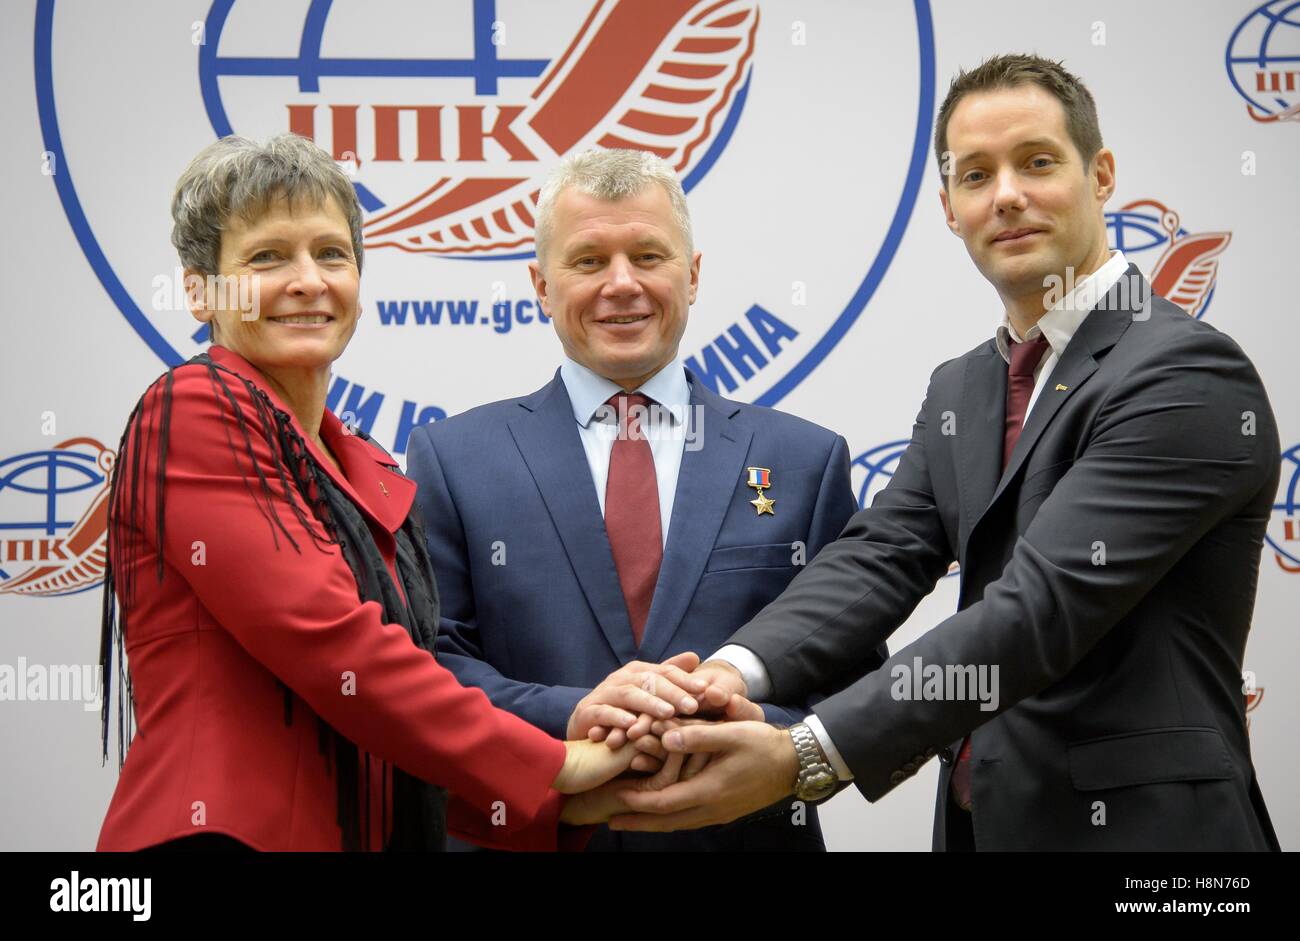 NASA International Space Station Expedition 50 Soyuz MS-03 prime crew members (L-R) American astronaut Peggy Whitson, Russian cosmonaut Oleg Novitskiy of Roscosmos, and French astronaut Thomas Pesquet of the European Spac Agency join hands during a group photo after a crew press conference at the Gagarin Cosmonaut Training Center October 26, 2016 in Star City, Russia. Stock Photo